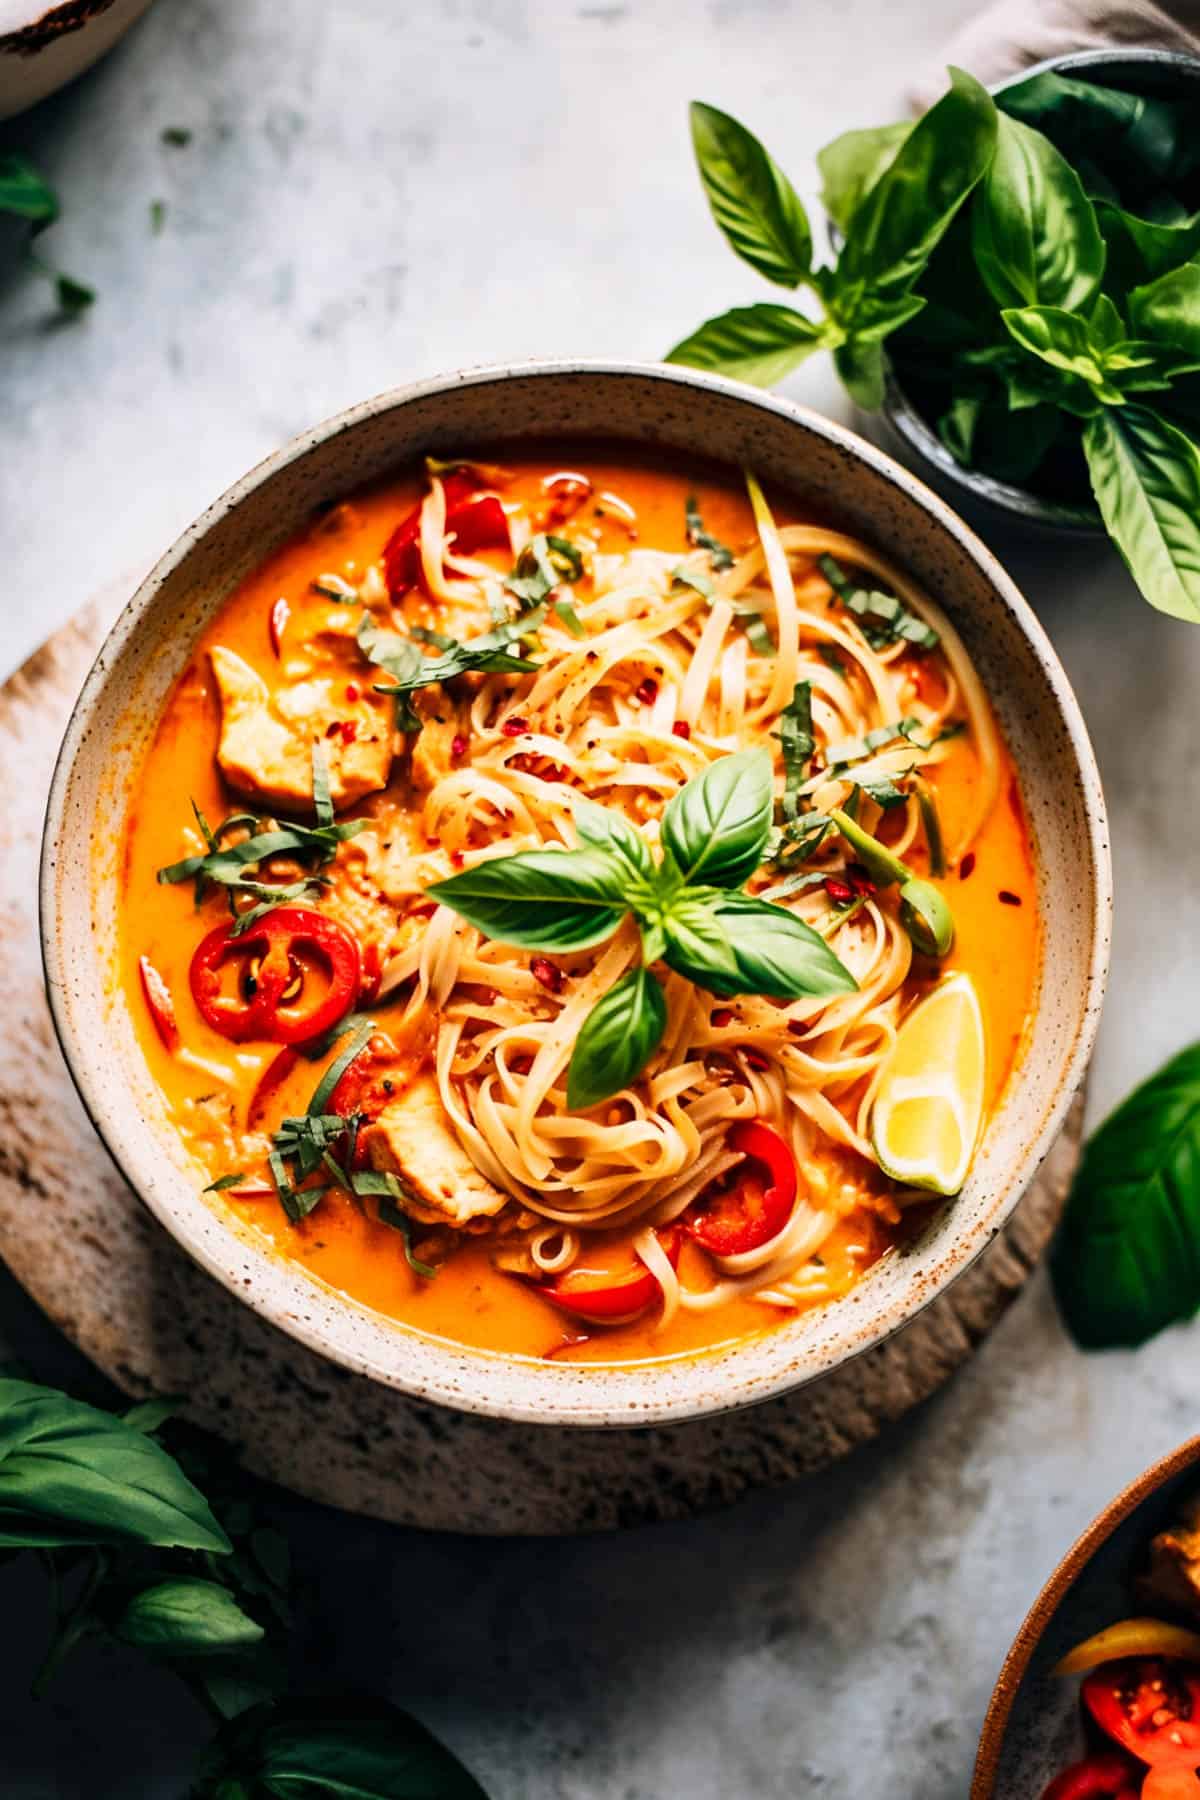 Thai red curry noodle soup with basil and peppers.